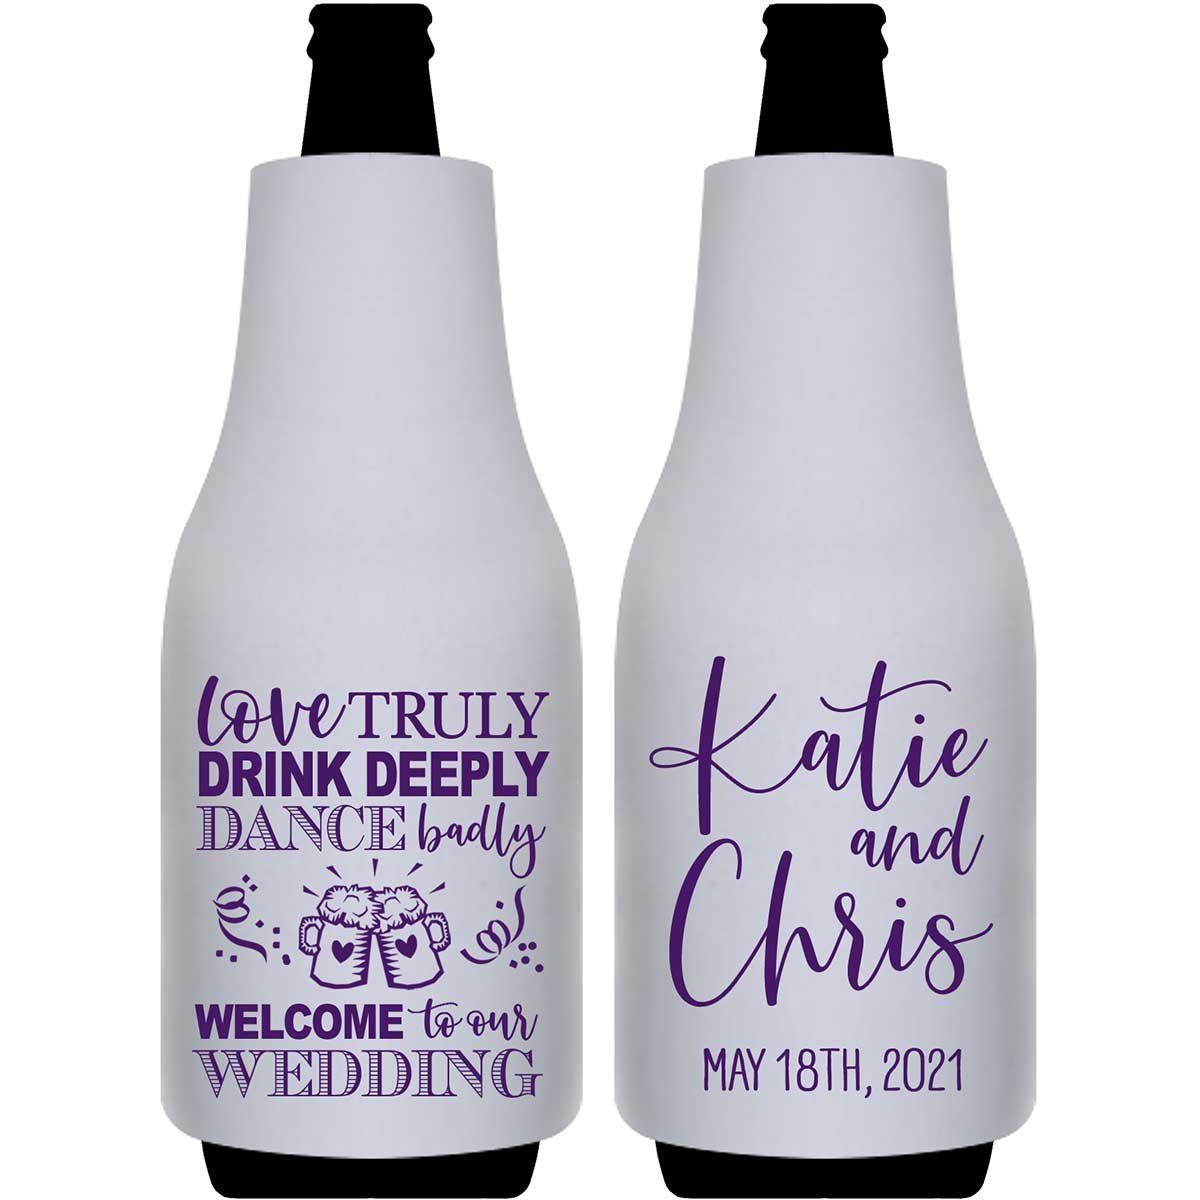 Love Truly Drink Deeply Dance Badly 1A Foldable Bottle Sleeve Koozies Wedding Gifts for Guests